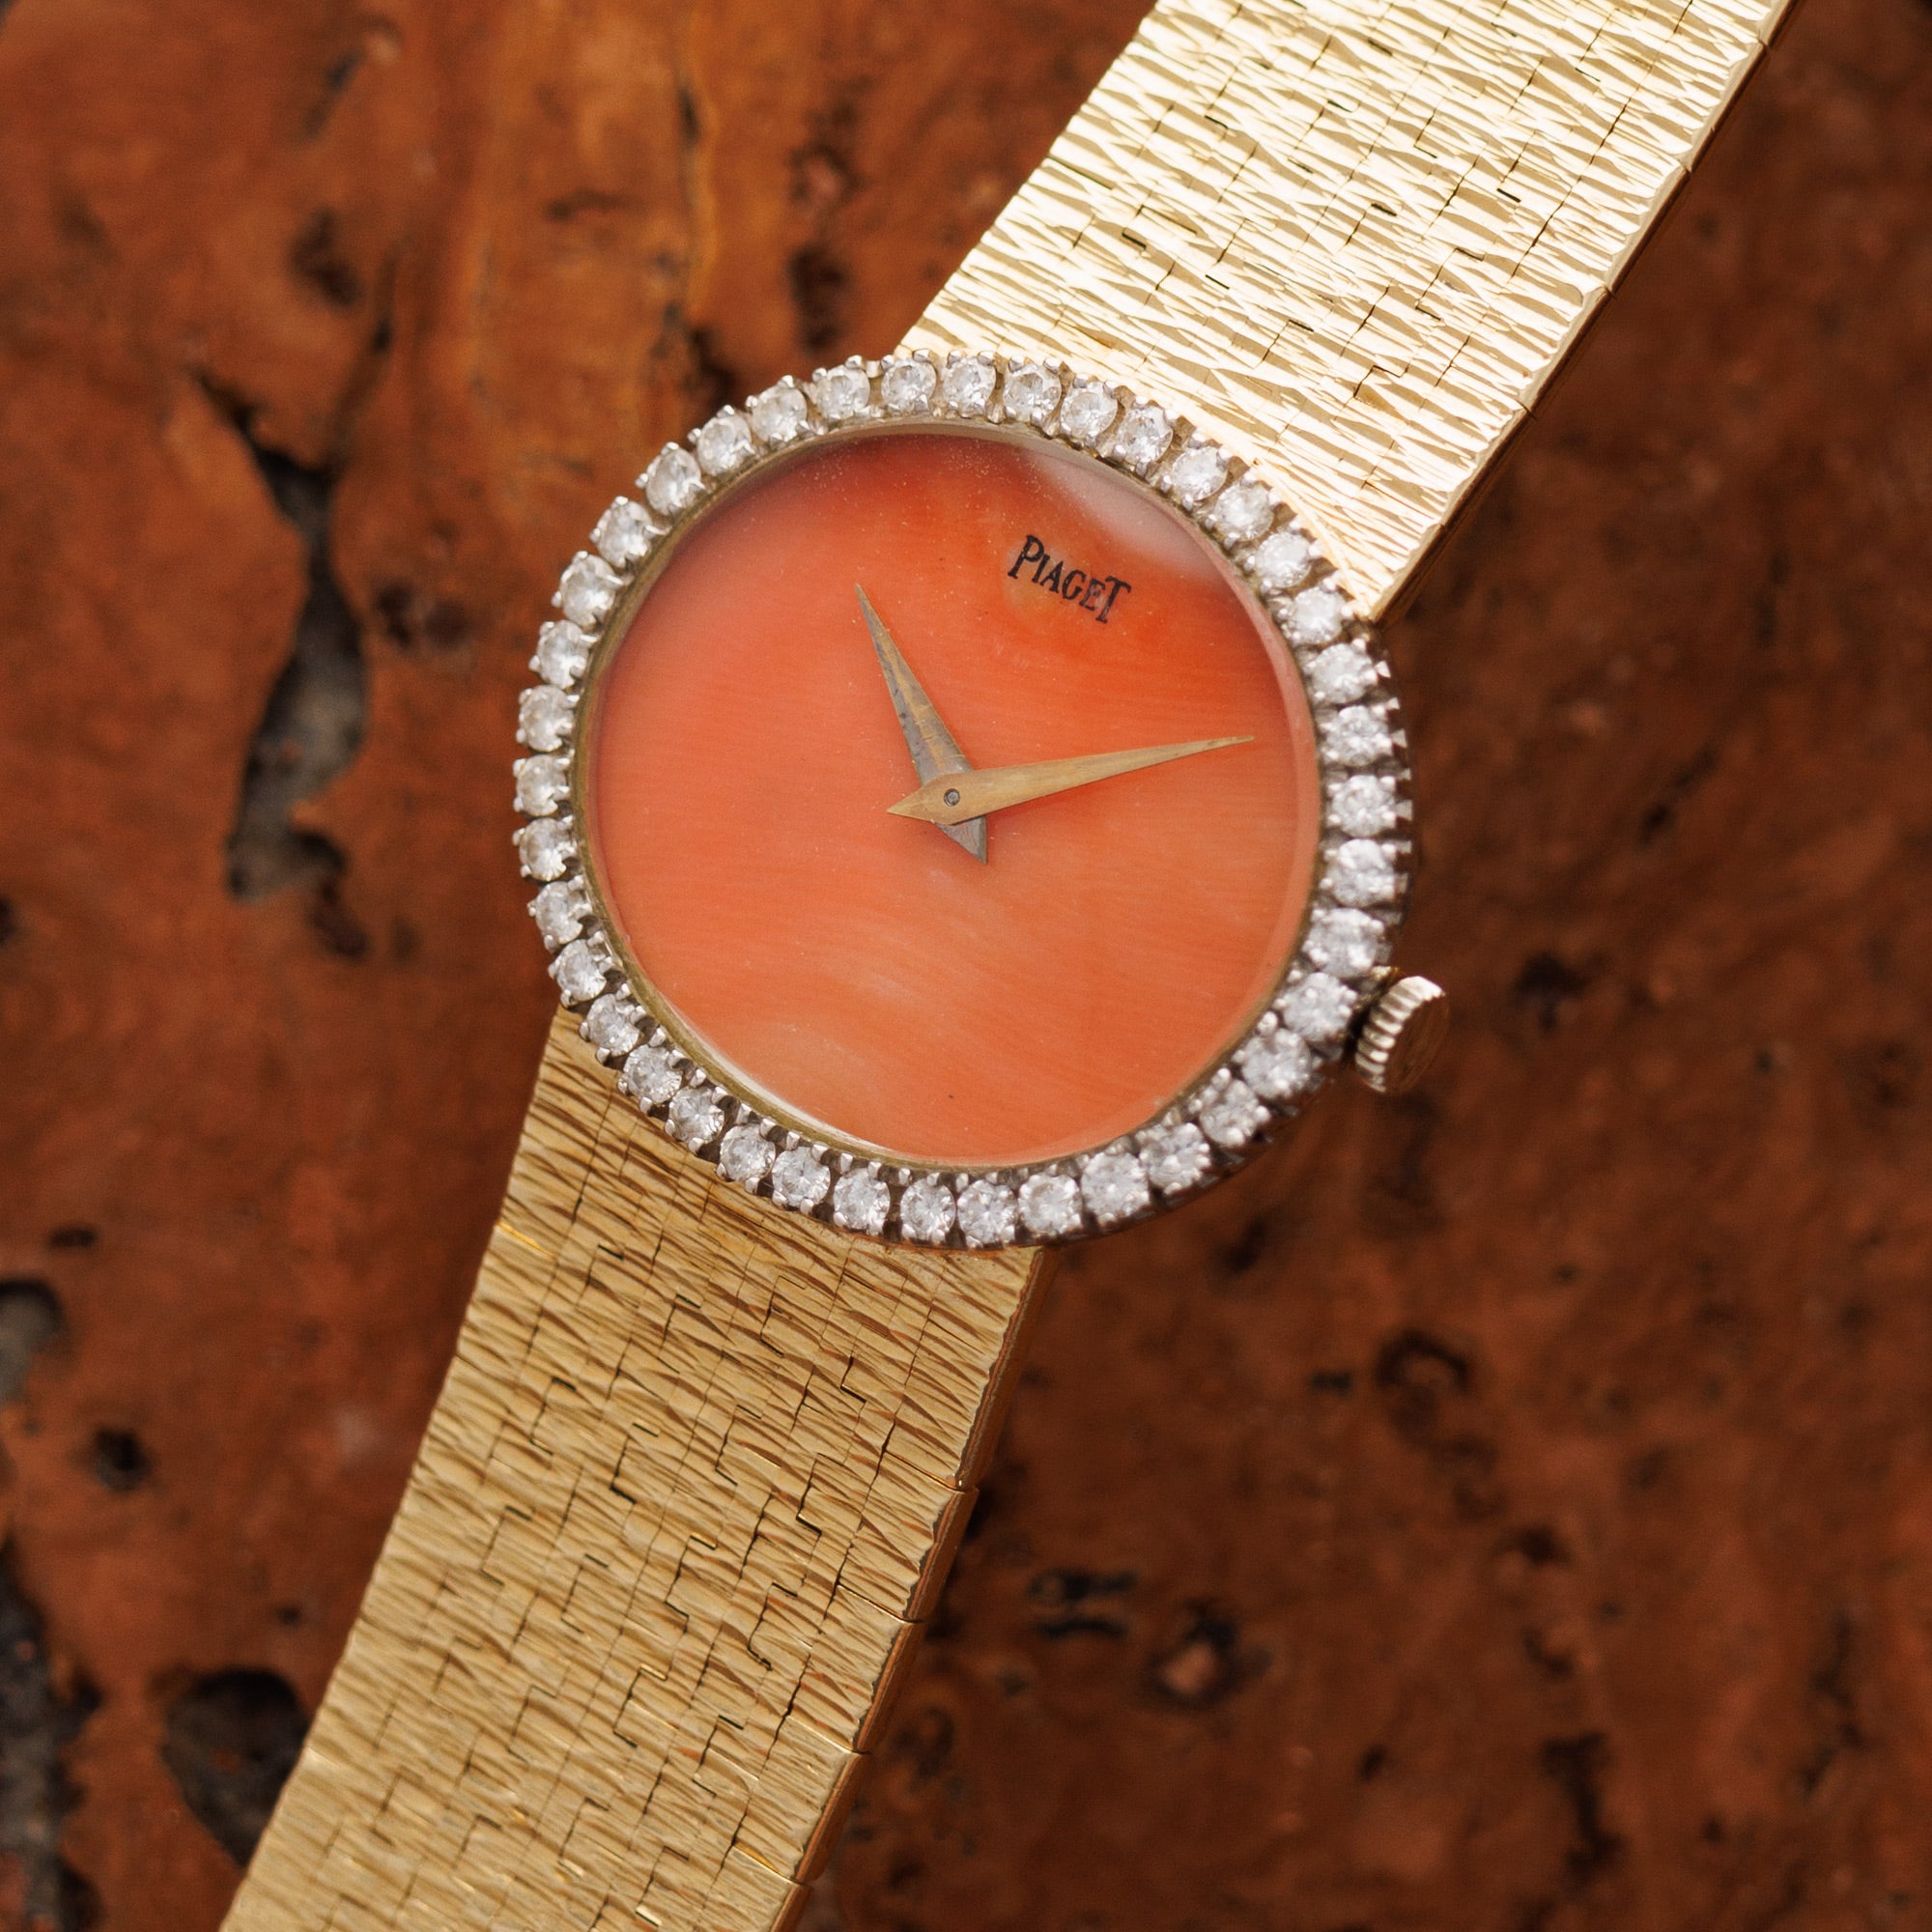 Piaget - Piaget Yellow Gold Coral Diamond Watch - The Keystone Watches